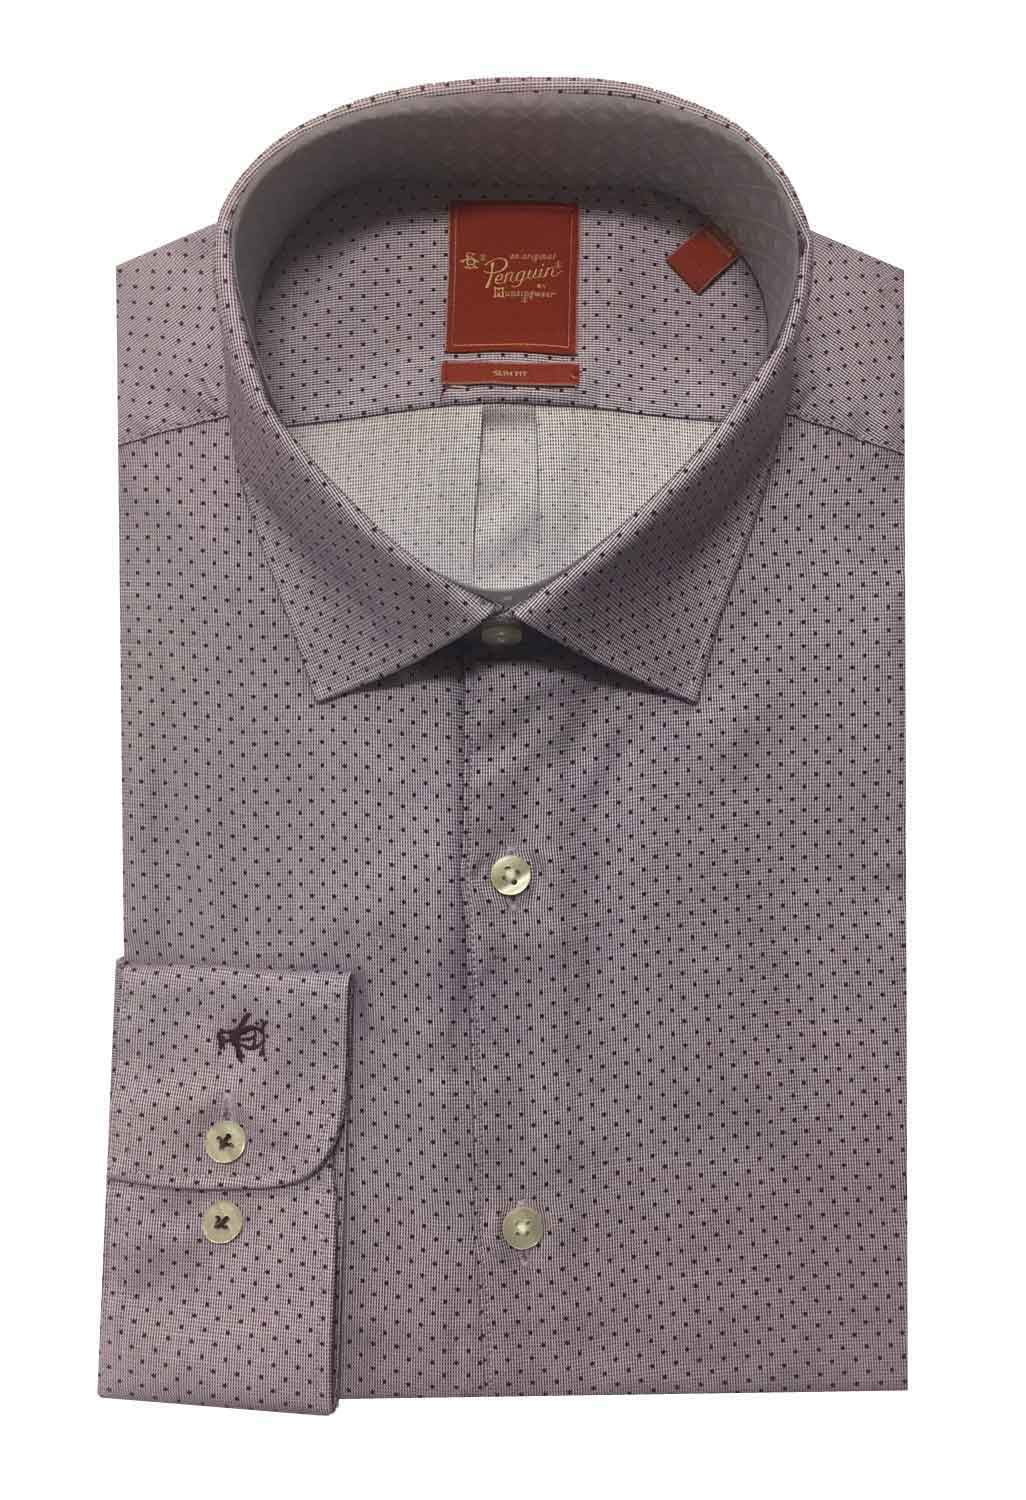 M&S Pure Cotton SLIM Fit LONG SLEEVE SHIRT ~ Size 17.5" ~ BURGUNDY CHECK 